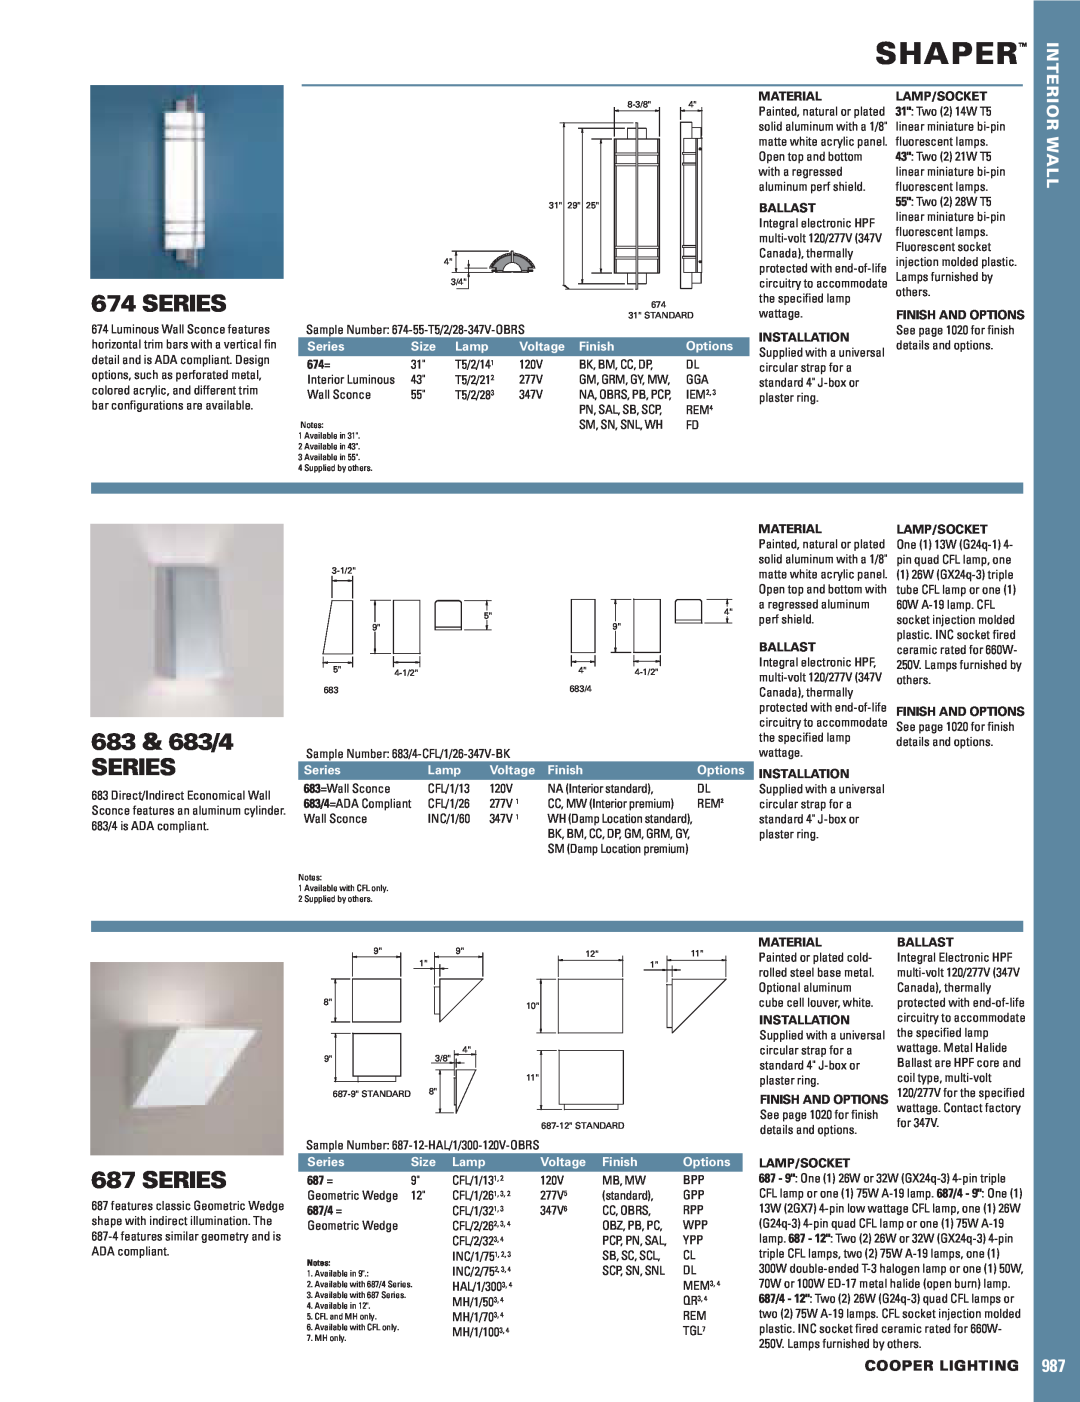 Cooper Lighting manual Shaper, Series, 683 & 683/4 SERIES, Wall, Cooper Lighting, Size, Lamp, Voltage, Finish, Options 